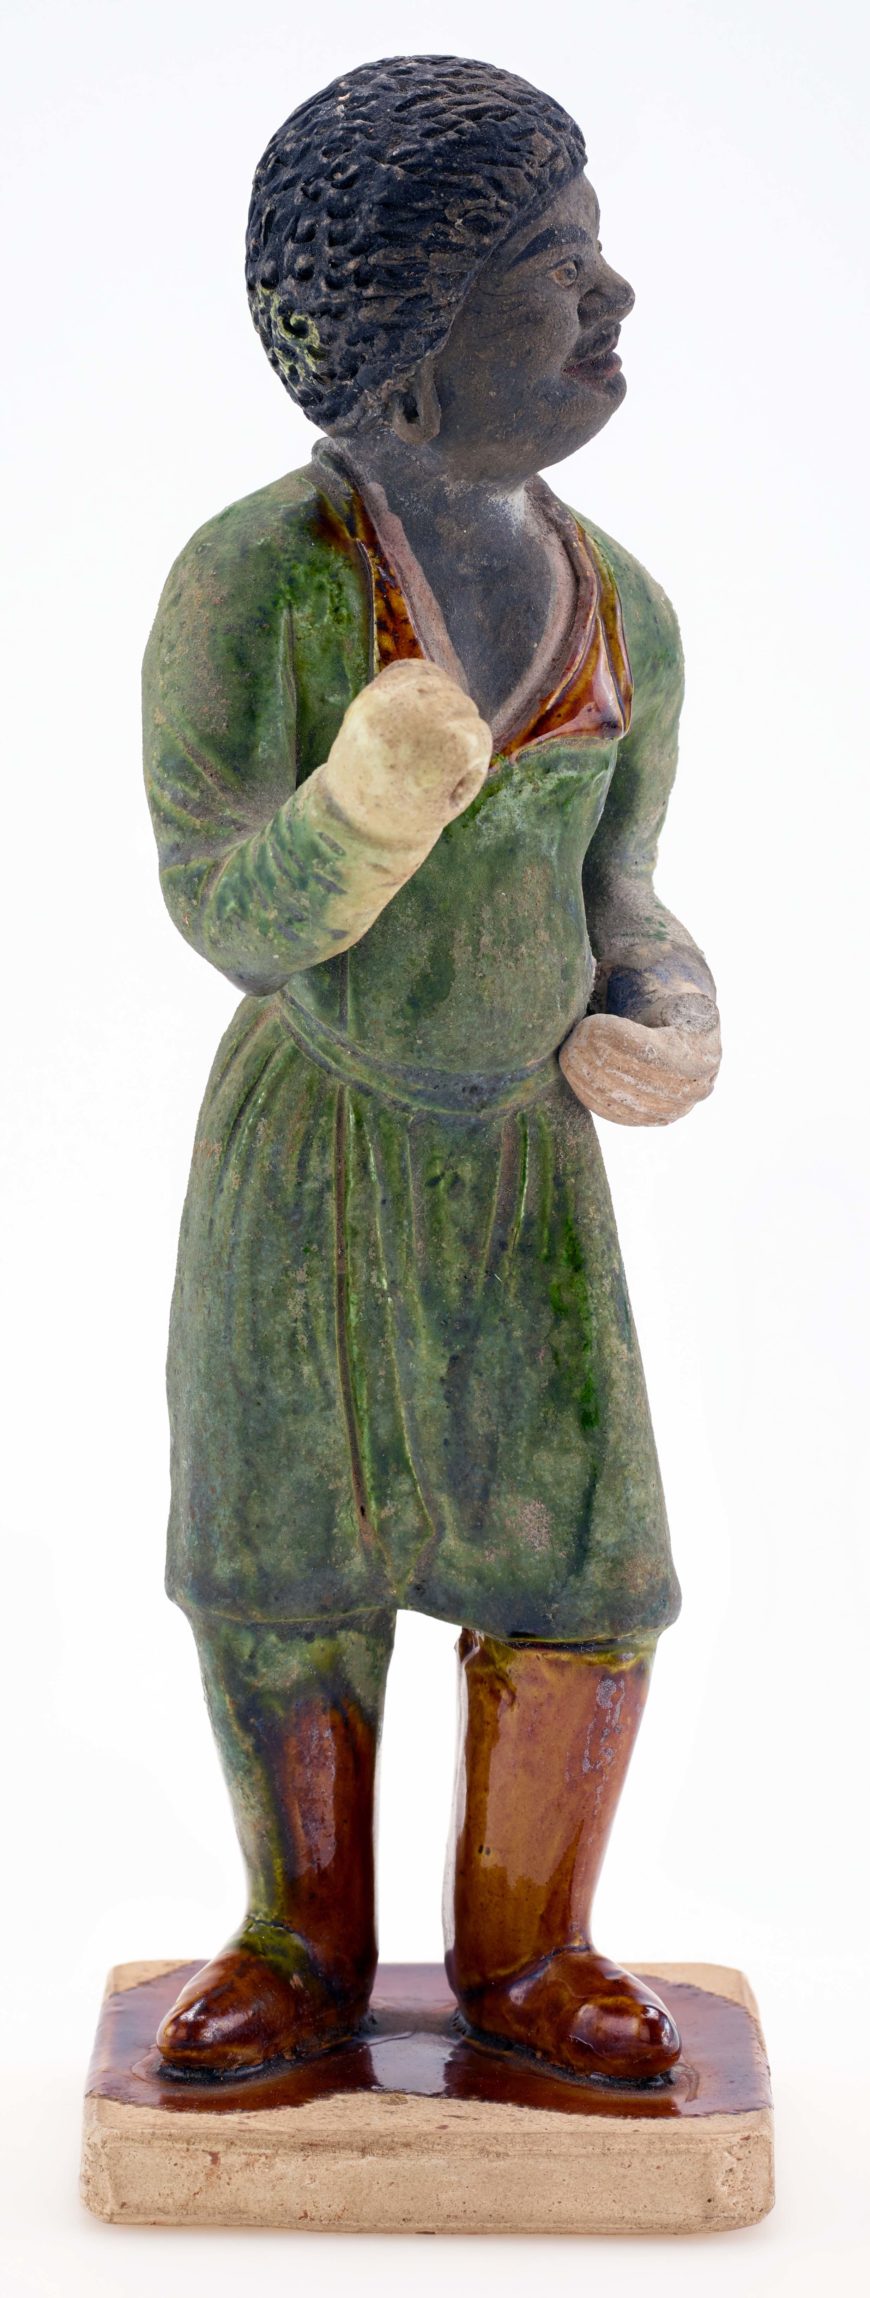 Tomb figure of a groom, Tang dynasty, ca. 700-750, Earthenware with lead-silicate glazes and painted details, China, 20.7 x 6.7 cm (Freer Gallery of Art, Smithsonian, Washington, DC: Purchase — Charles Lang Freer Endowment, F1952.14)